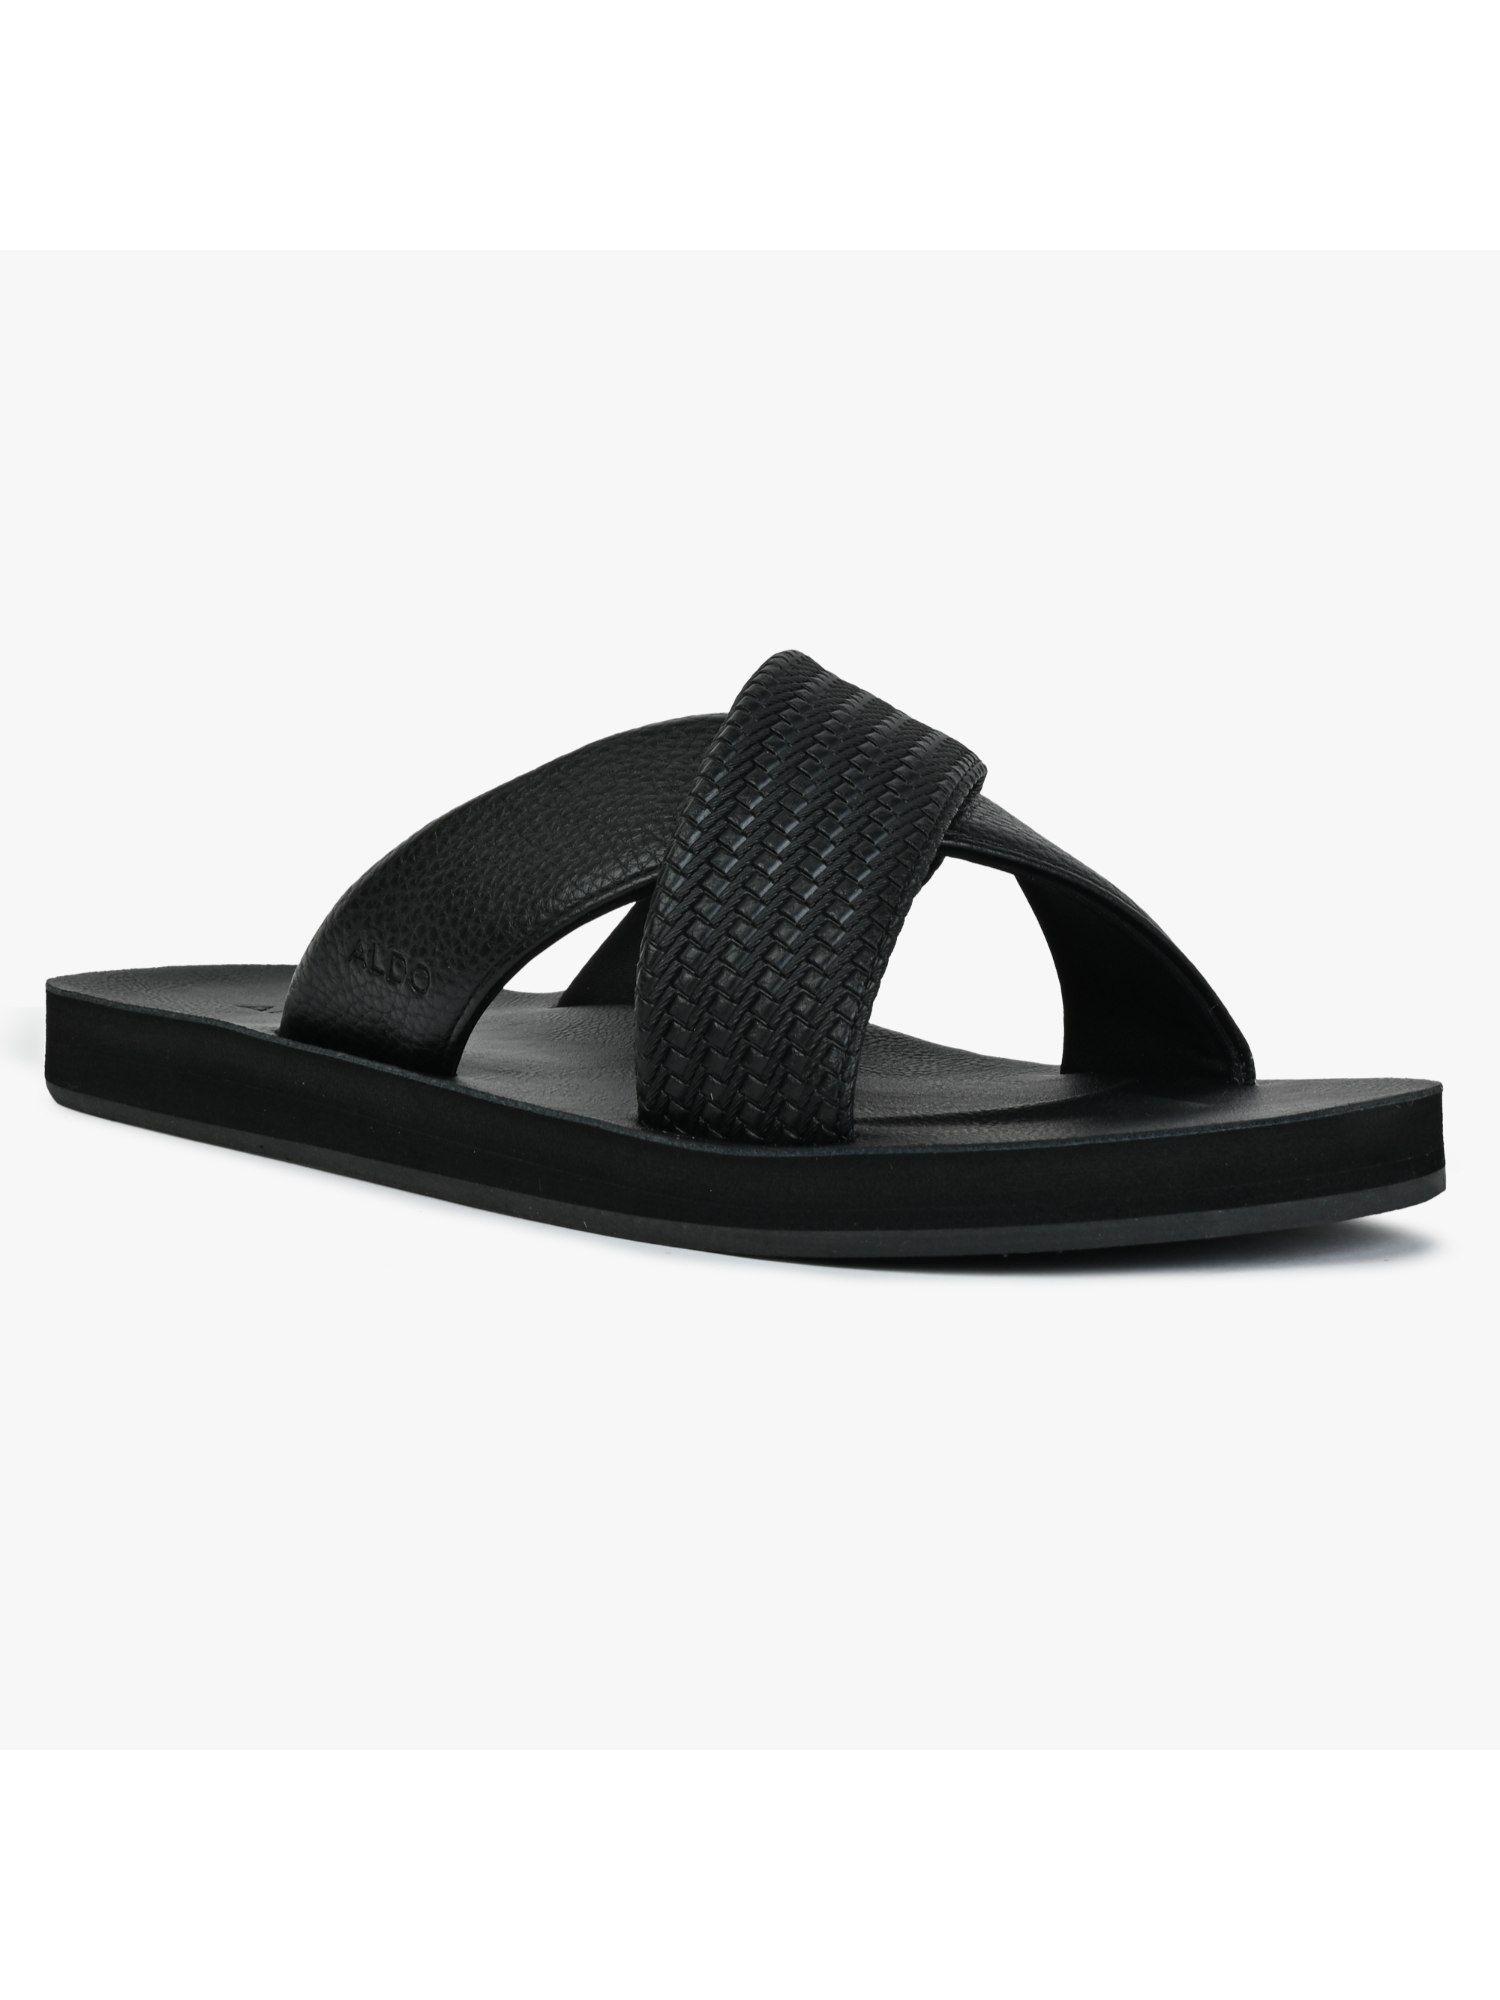 stmock007-black-synthetic-sandals